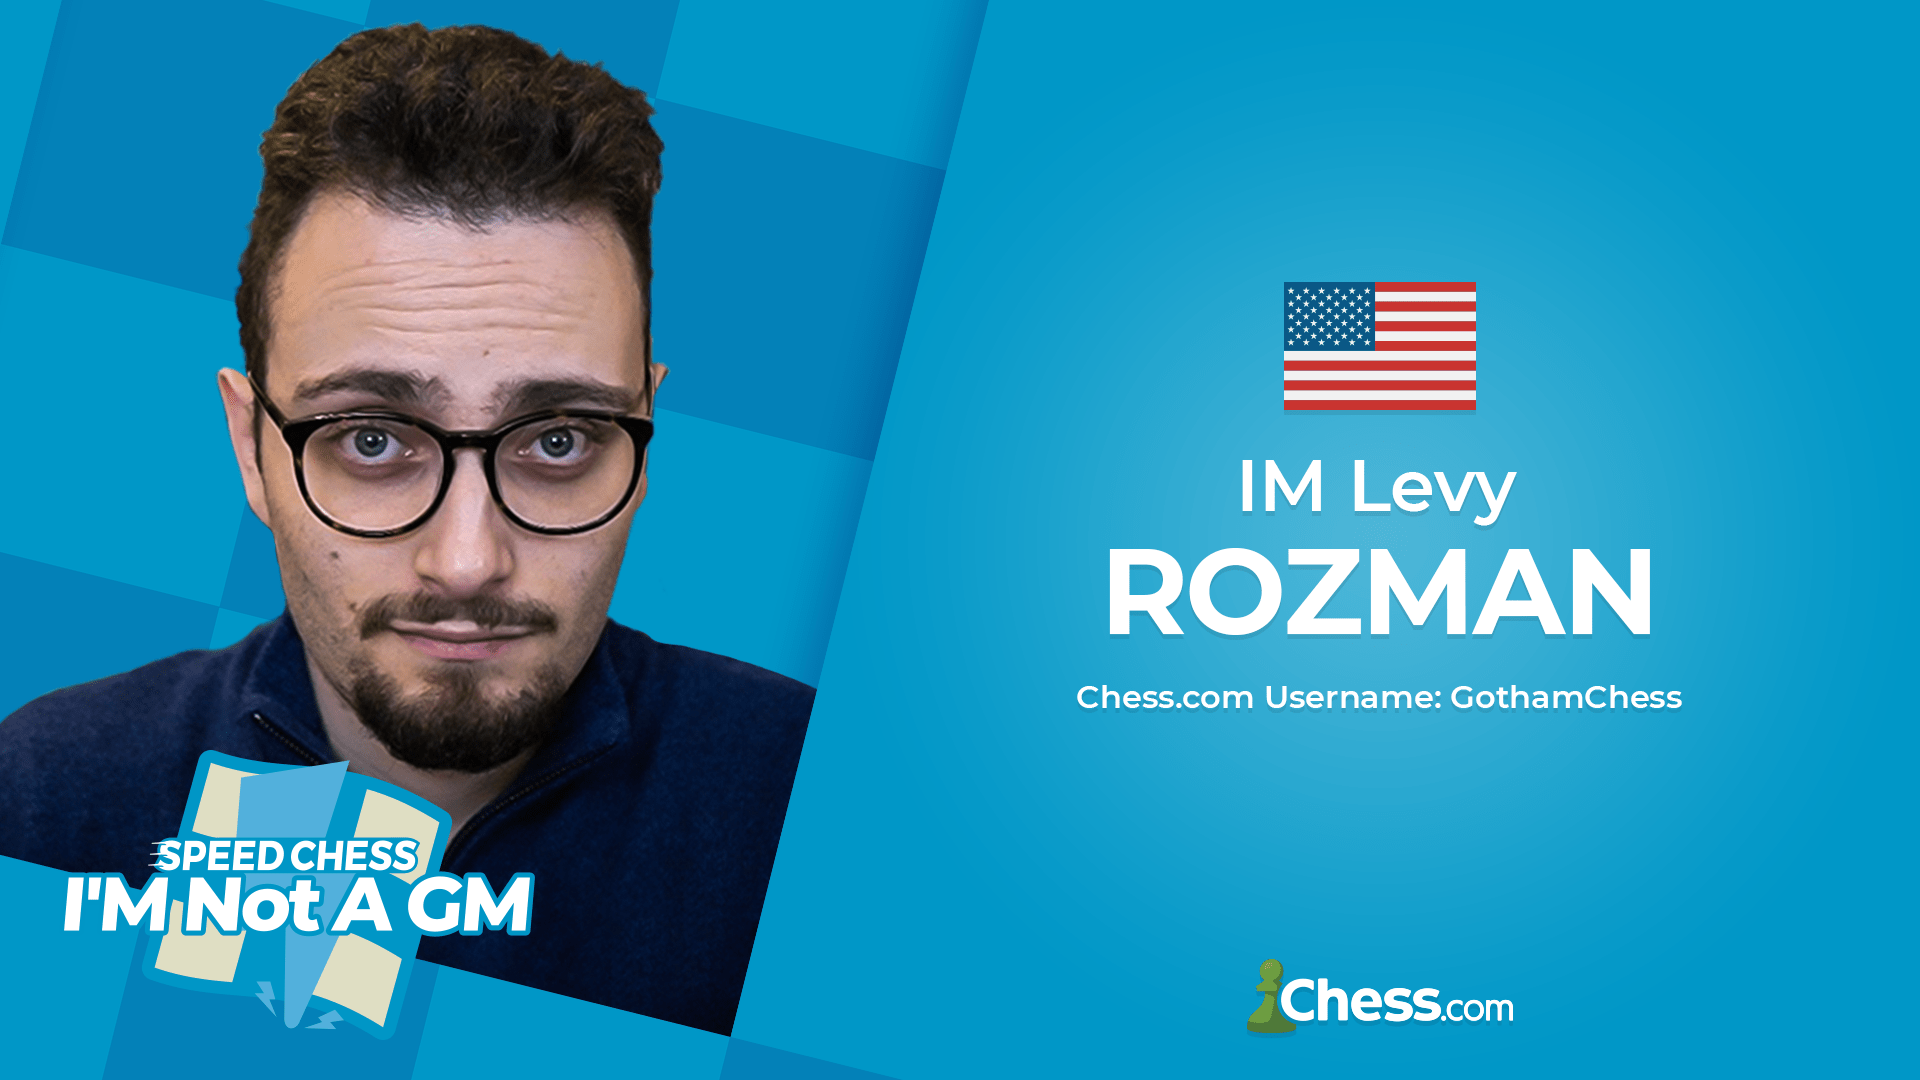 Chess.com on X: The IM Not A GM #speedchess Championship continues with IM  @GothamChess vs. IM @TaniaSachdev at 9:30 a.m. PDT on   and all  video platforms!  Best of all, we